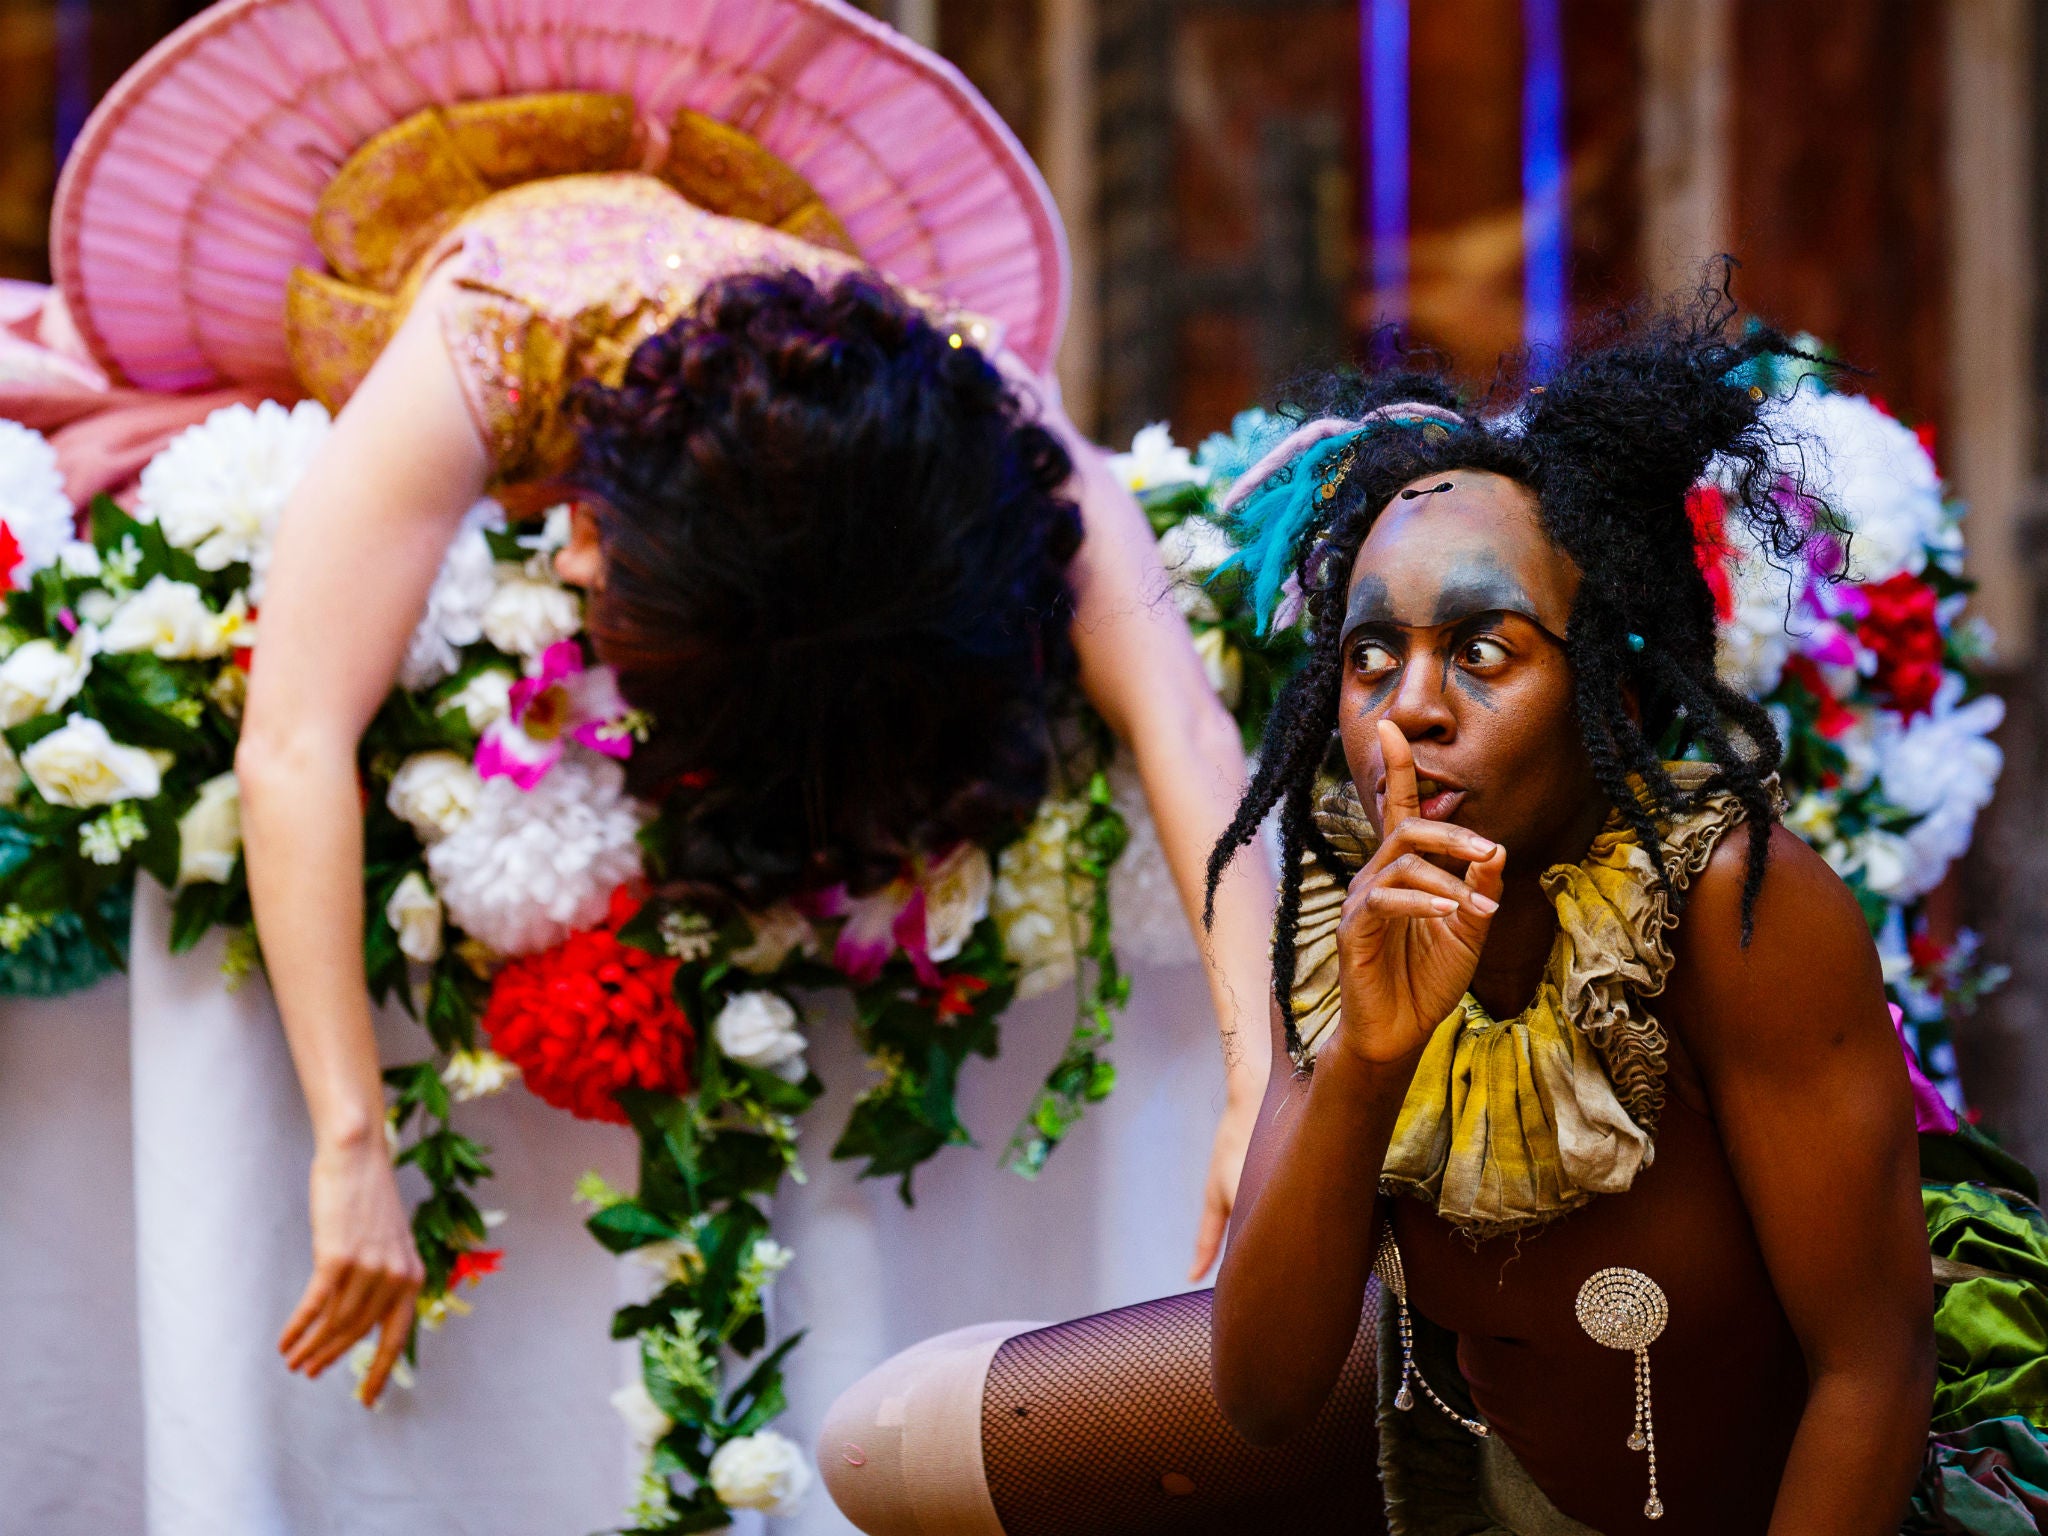 Meow Meow as Titania and Nandi Bhebhe as First Fairy in A Midsummer Night's Dream